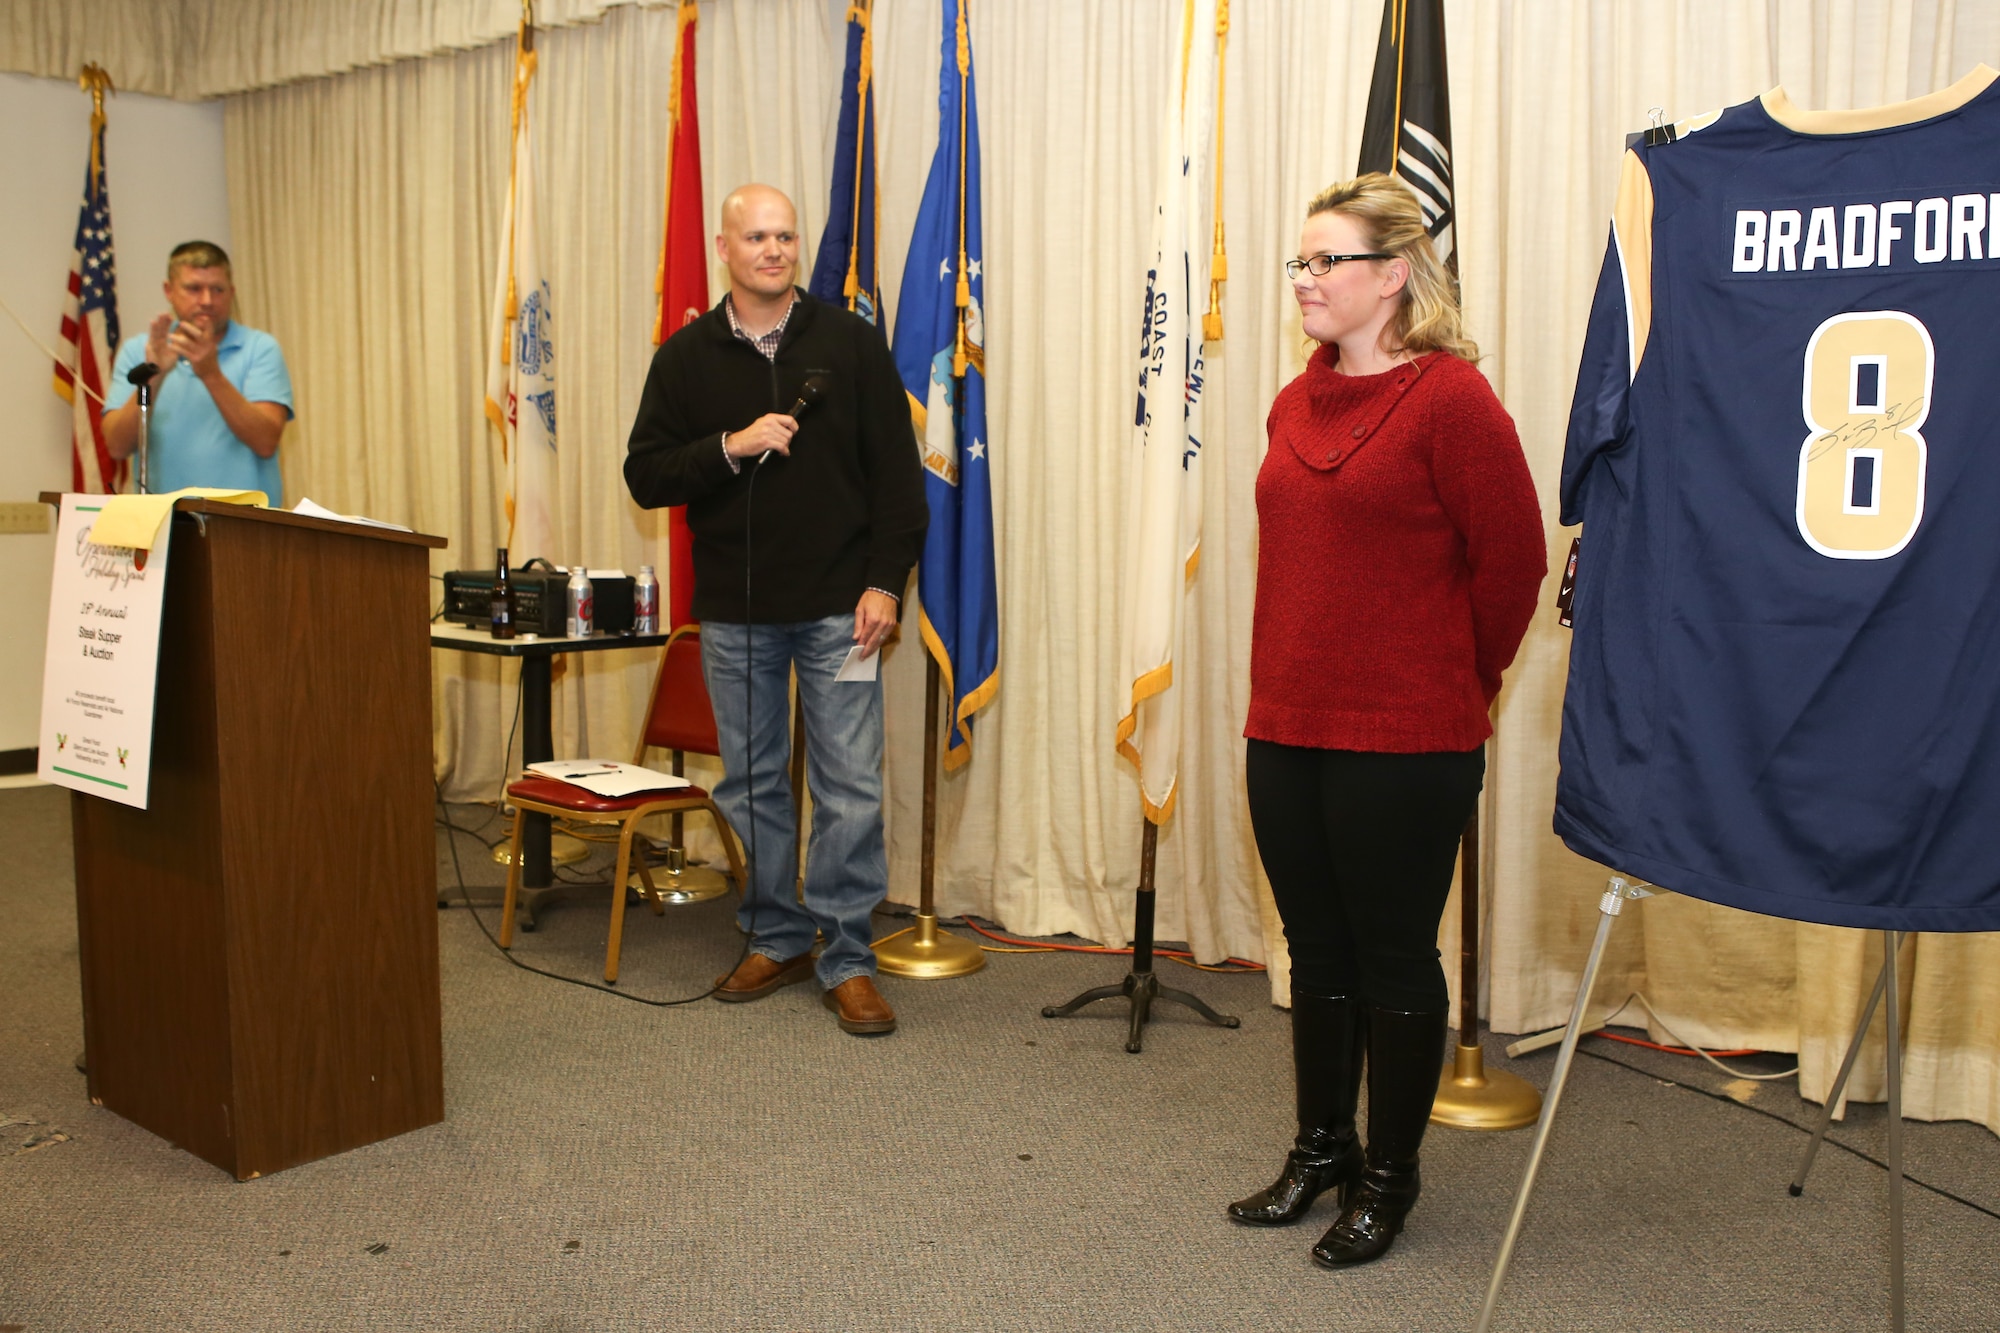 Staff Sgt. Ashley Osborn, right, a flight medic with the 137th Aeromedical Evacuation Squadron, receives a standing ovation on November 1 after sharing her story at the 16th annual Operation Holiday Spirit fundraiser at the Del City American Legion. Osborn received support from the organization three years ago when her son was hospitalized and diagnosed with meningitis. (U.S. Air Force photo/Staff Sgt. Caleb Wanzer)